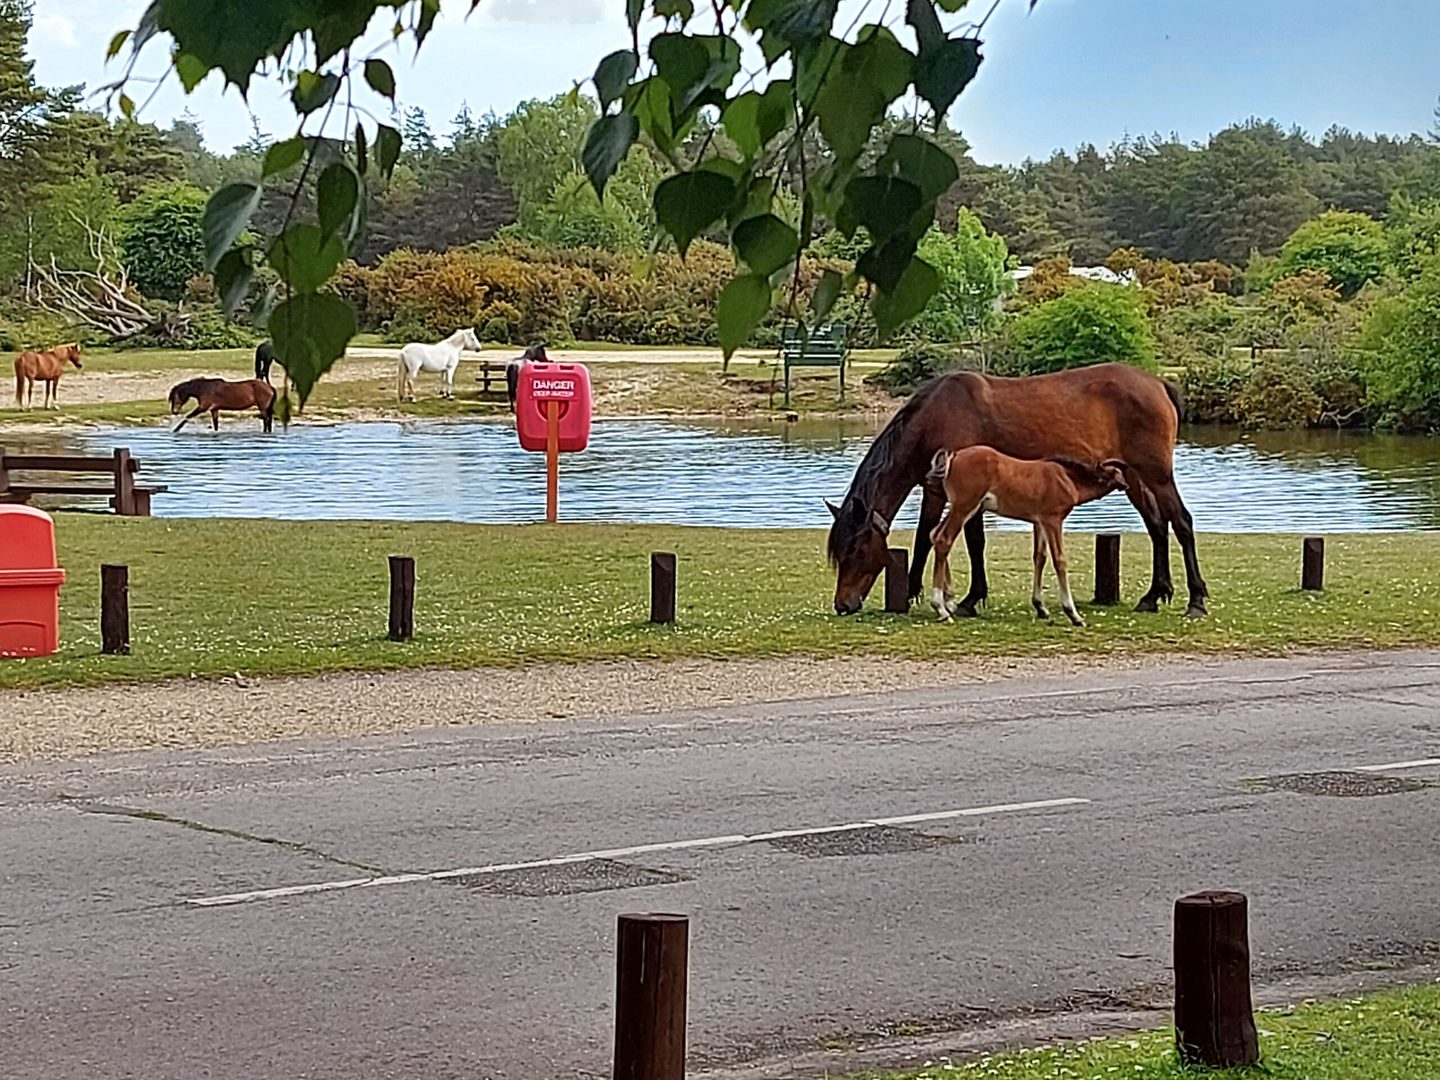 New Forest ponies and horses playing by a lake at Roundhill Campsite.